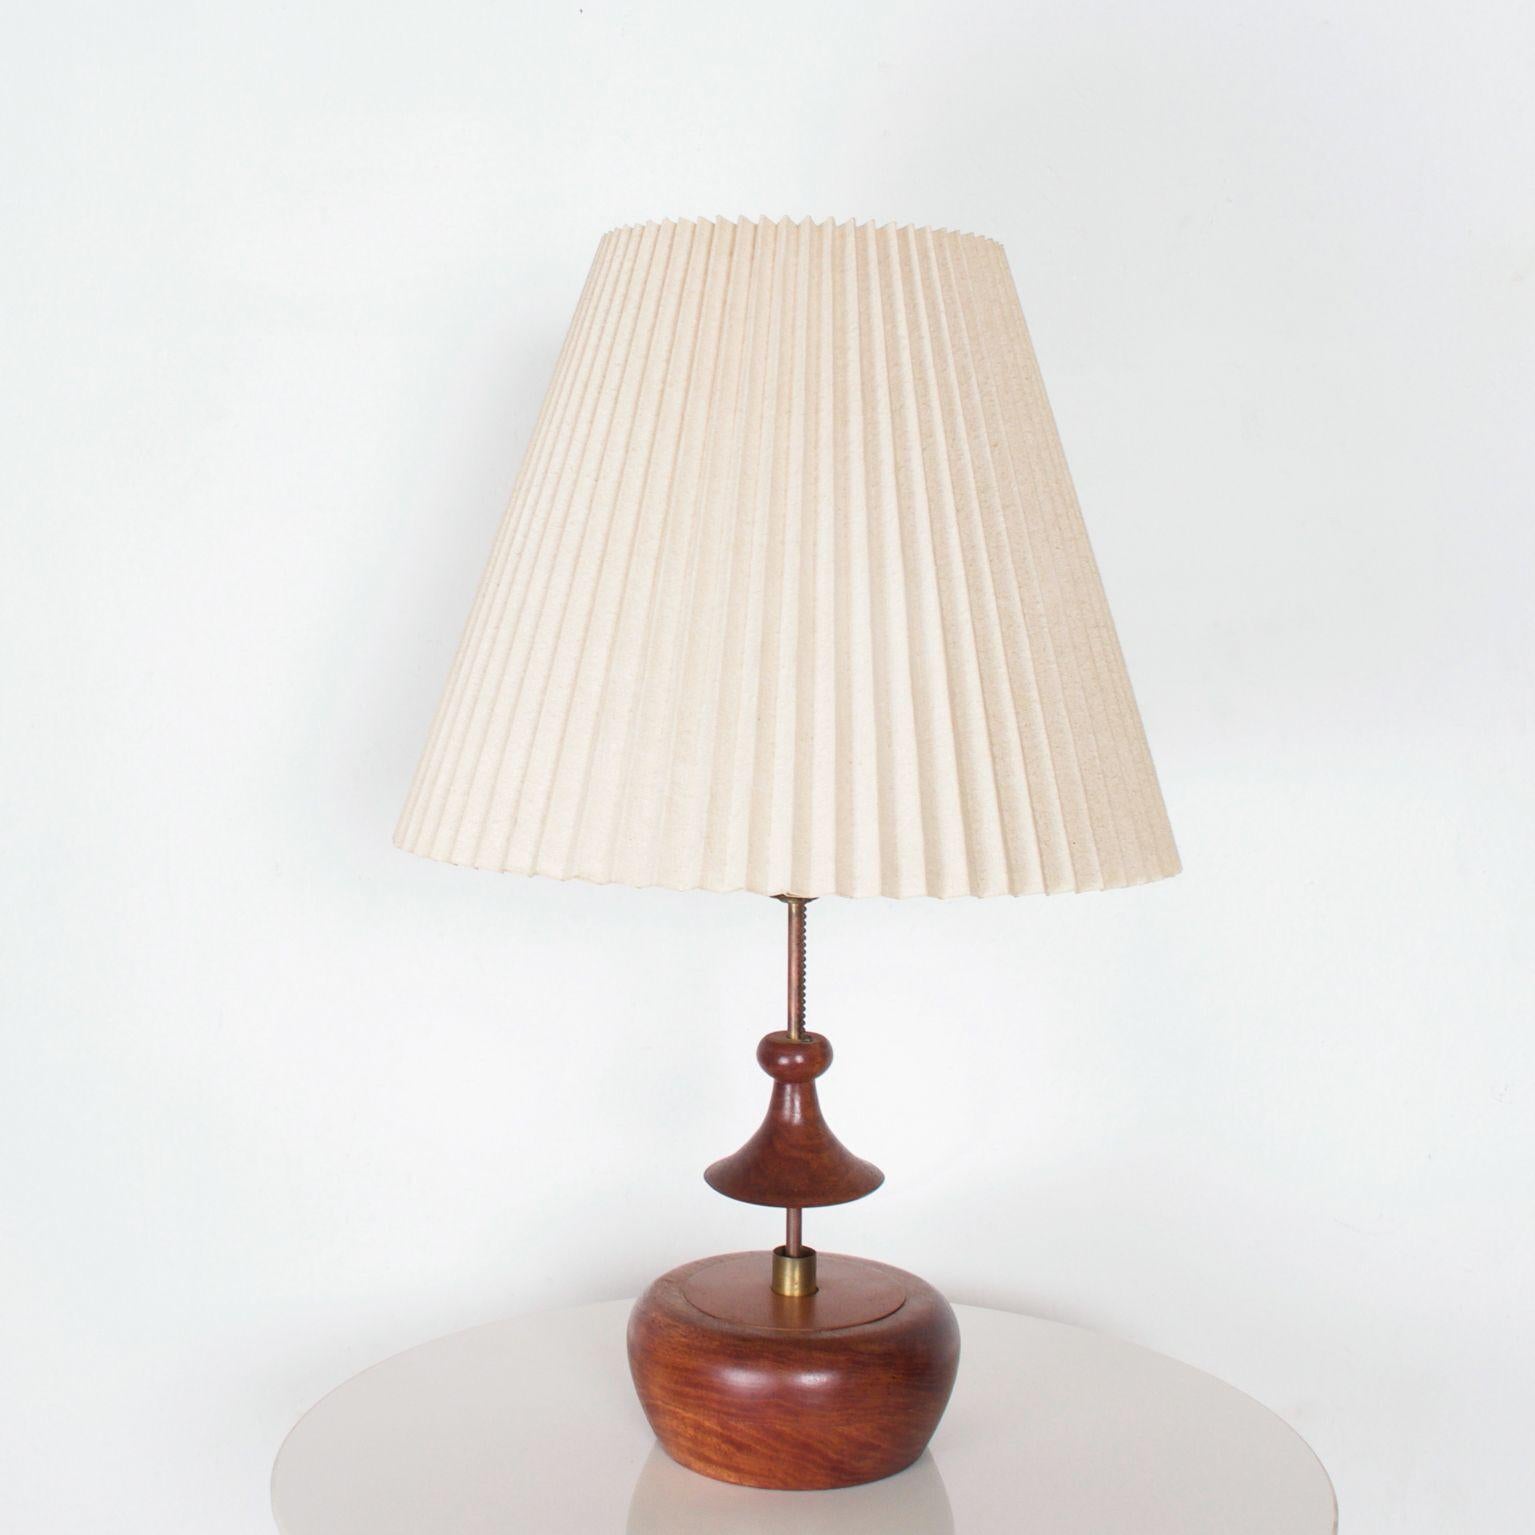 Mid-Century Modern 1950s Solid Walnut & Brass Table Lamp Sculptural Style Tony Paul, Westwood CA